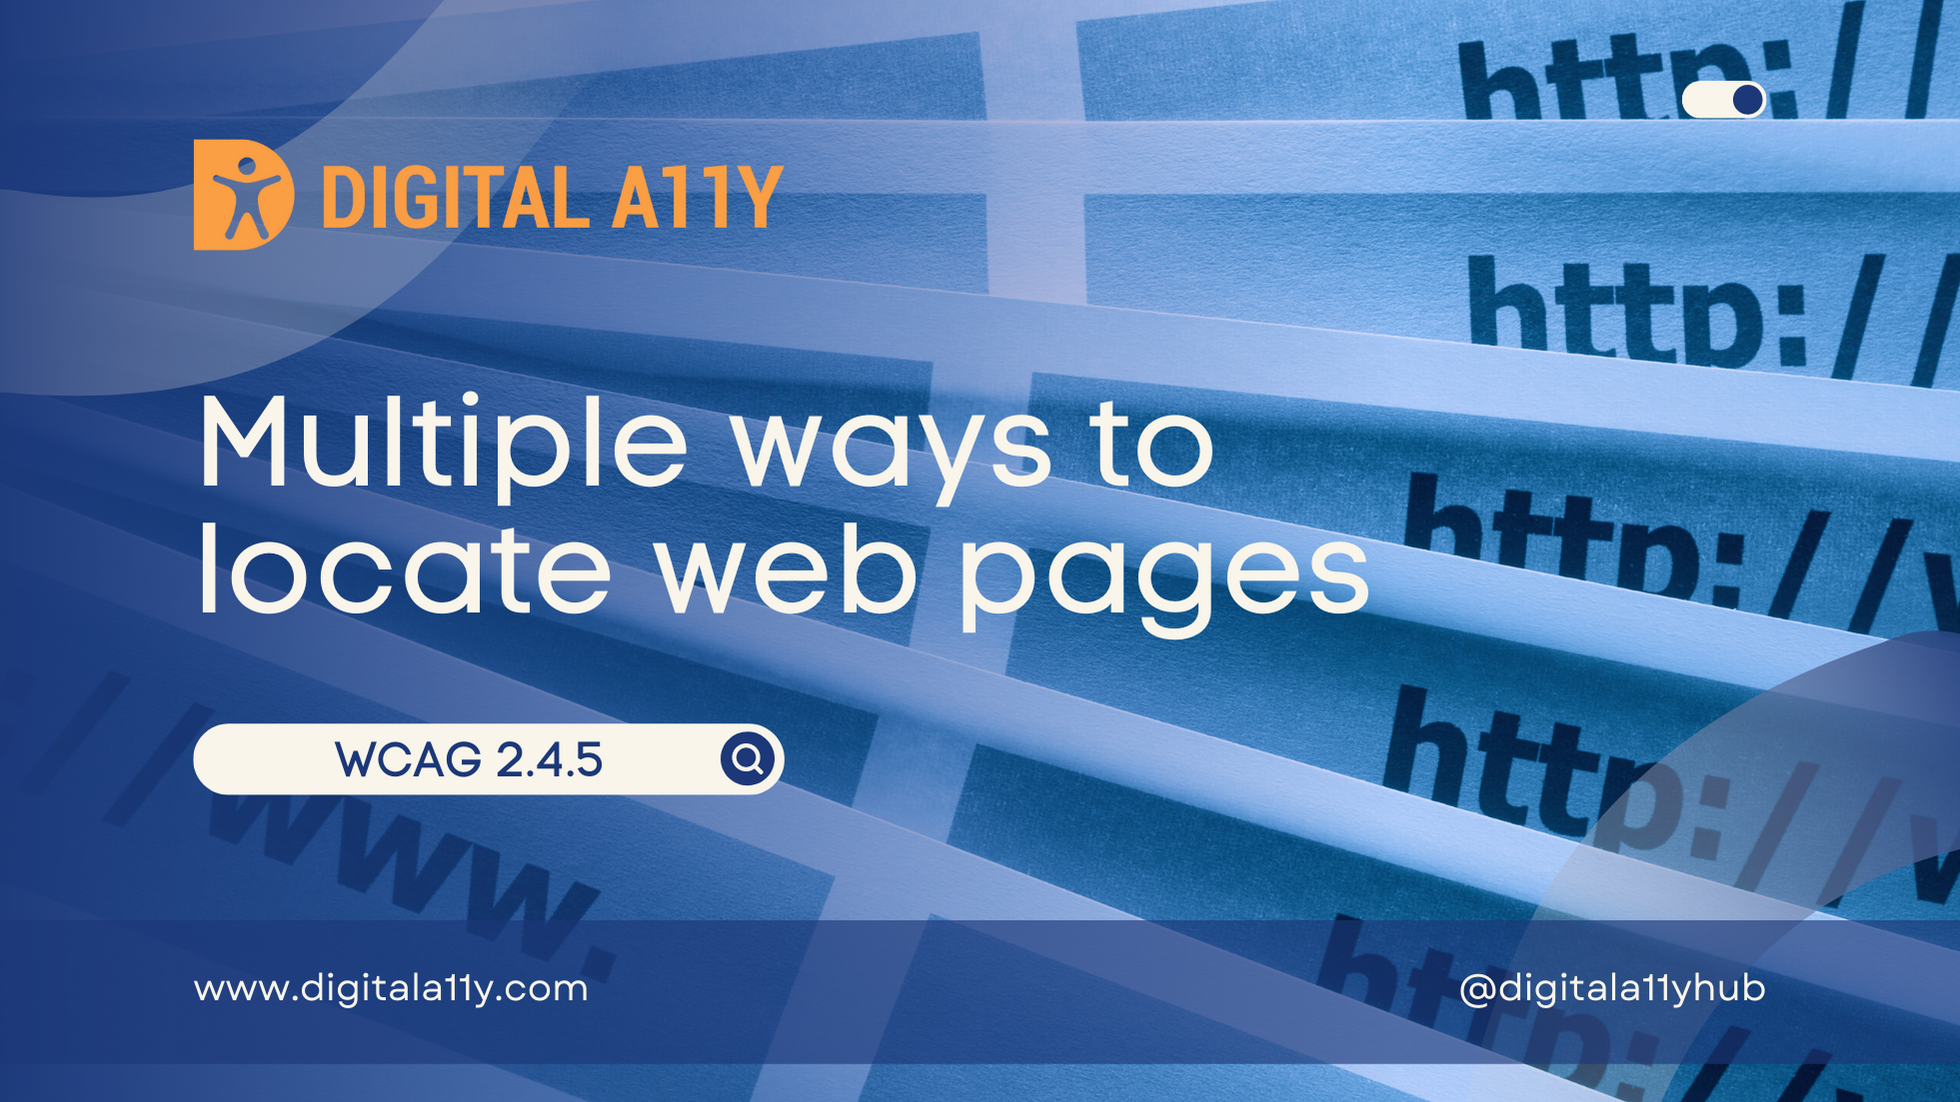 2.4.5 Multiple ways to locate web pages